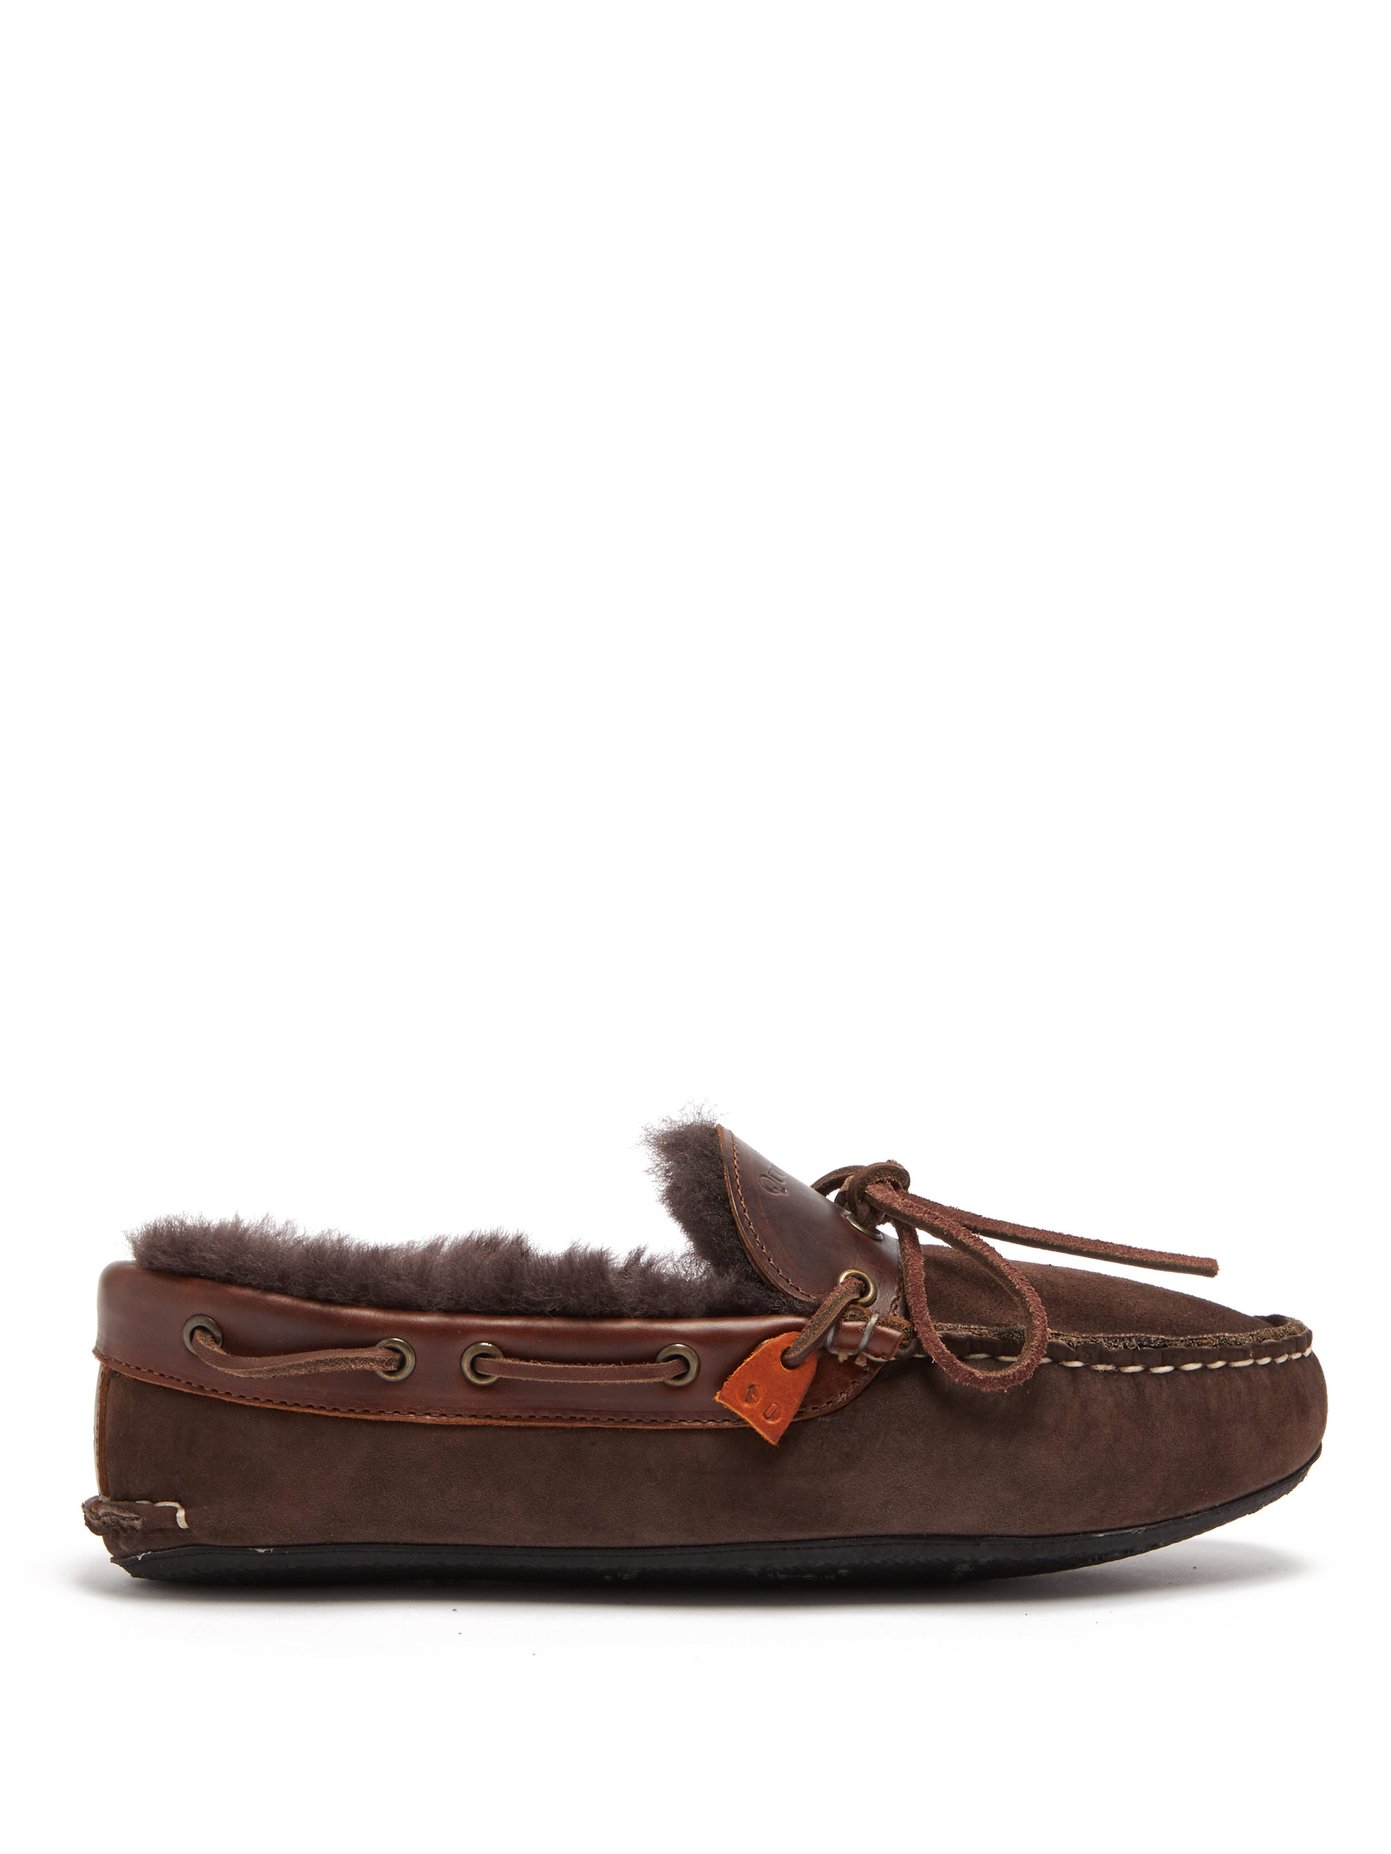 Fireside shearling-lined suede slippers 